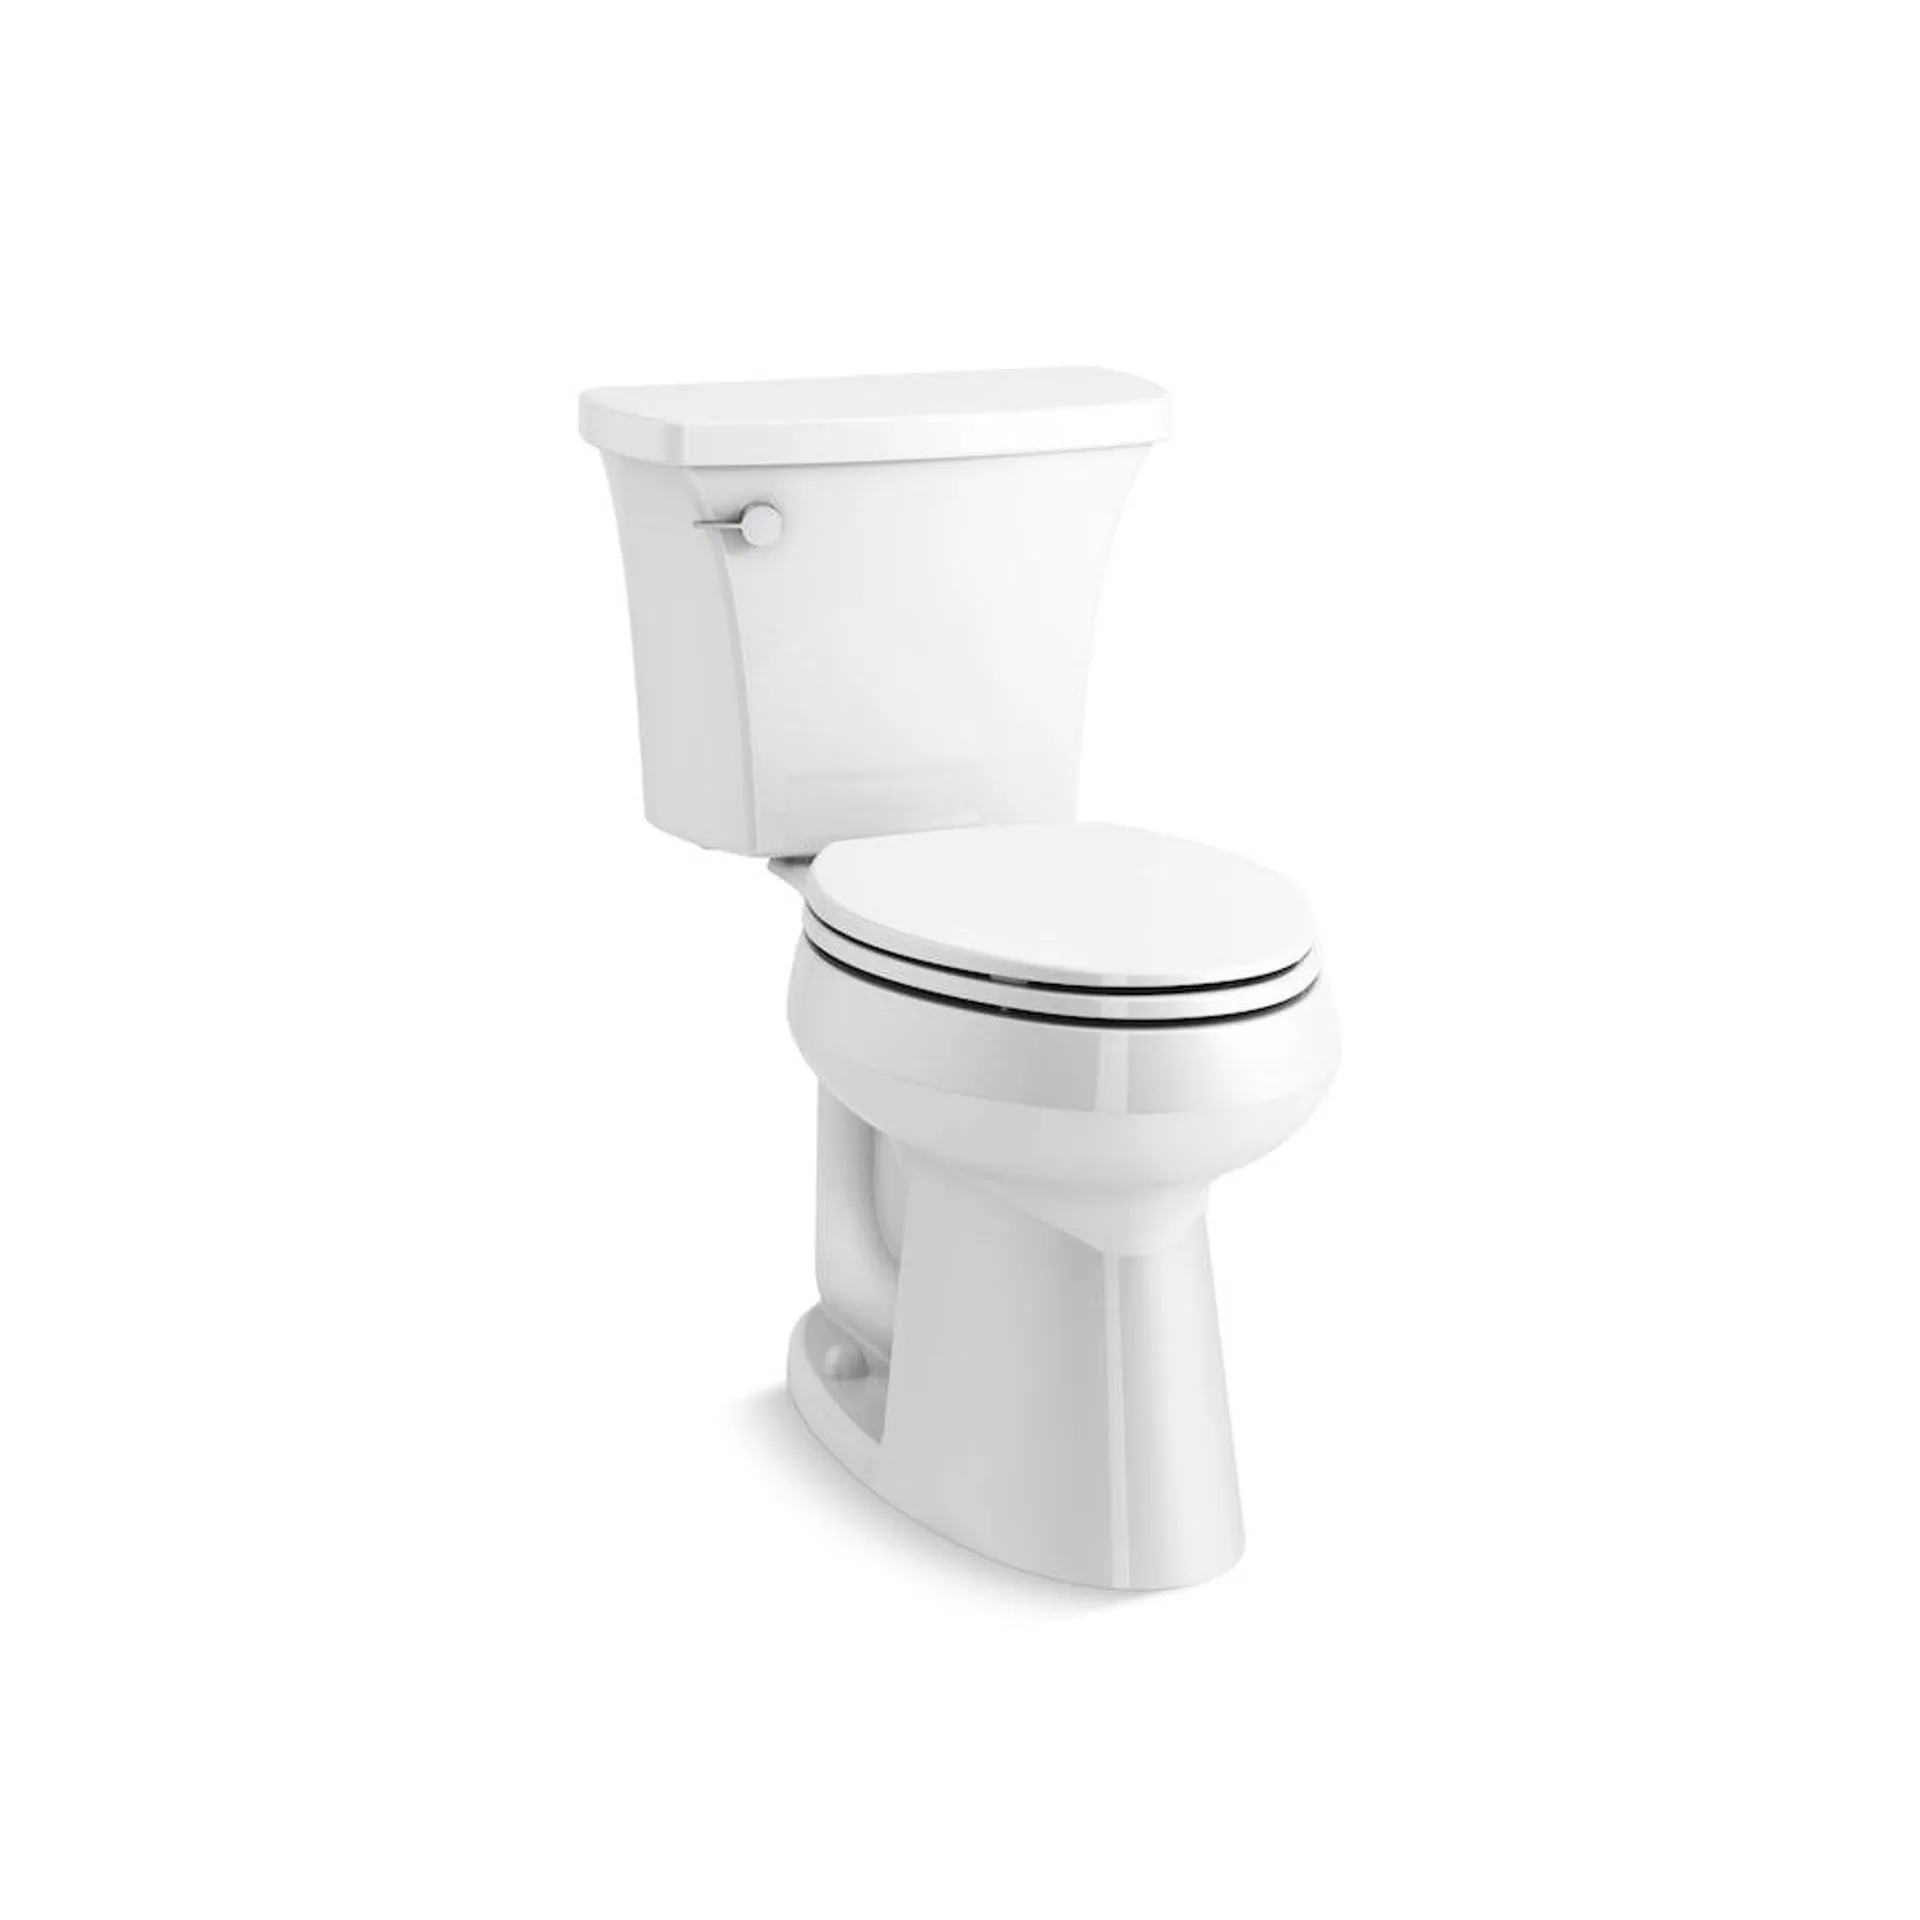 Highline Arc The Complete Solution 2-Piece Elongated Toilet, 4.8 LPF in White